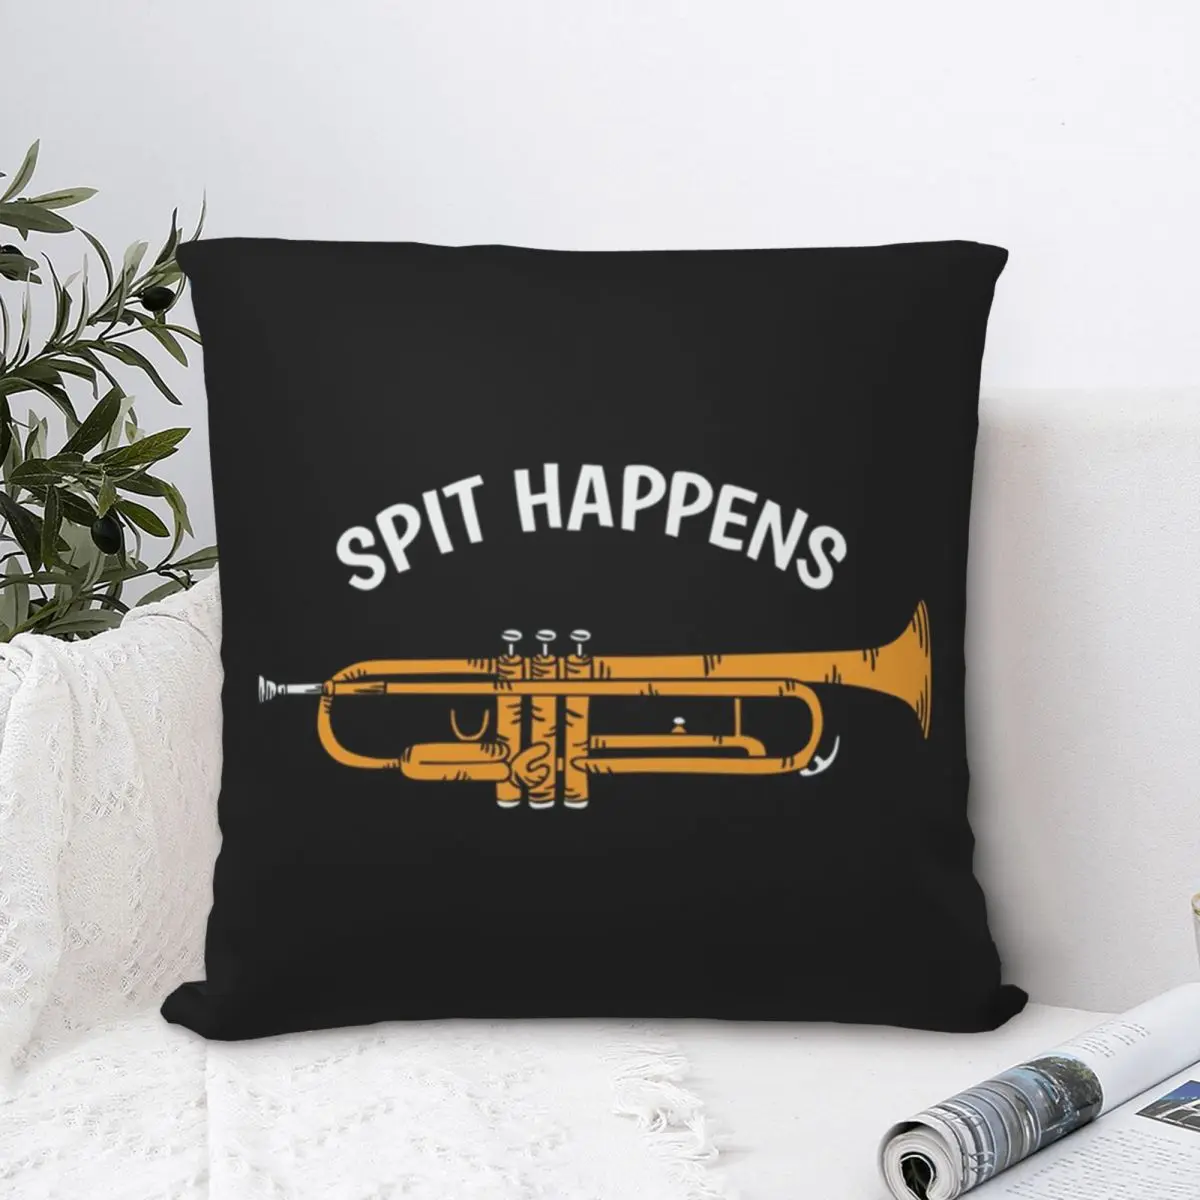 Spit Happens Musical Instrument Square Pillowcase Polyester Pillow Cover Velvet Cushion Zip Decorative Comfort Throw Pillow Home indian elephants square pillowcase cushion cover cute zip home decorative polyester pillow case home simple 45 45cm